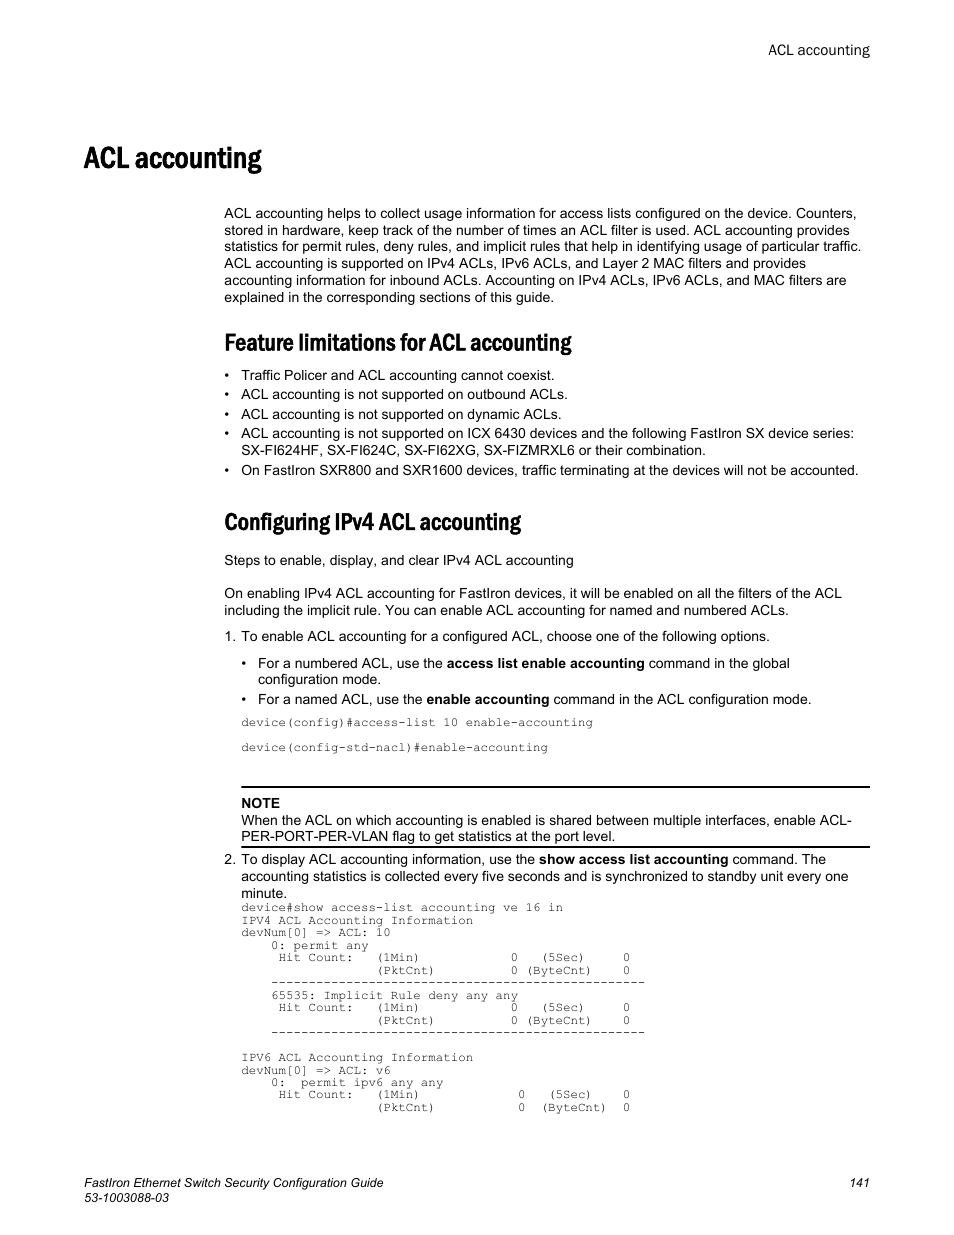 Acl accounting, Configuring ipv4 acl accounting, Feature limitations